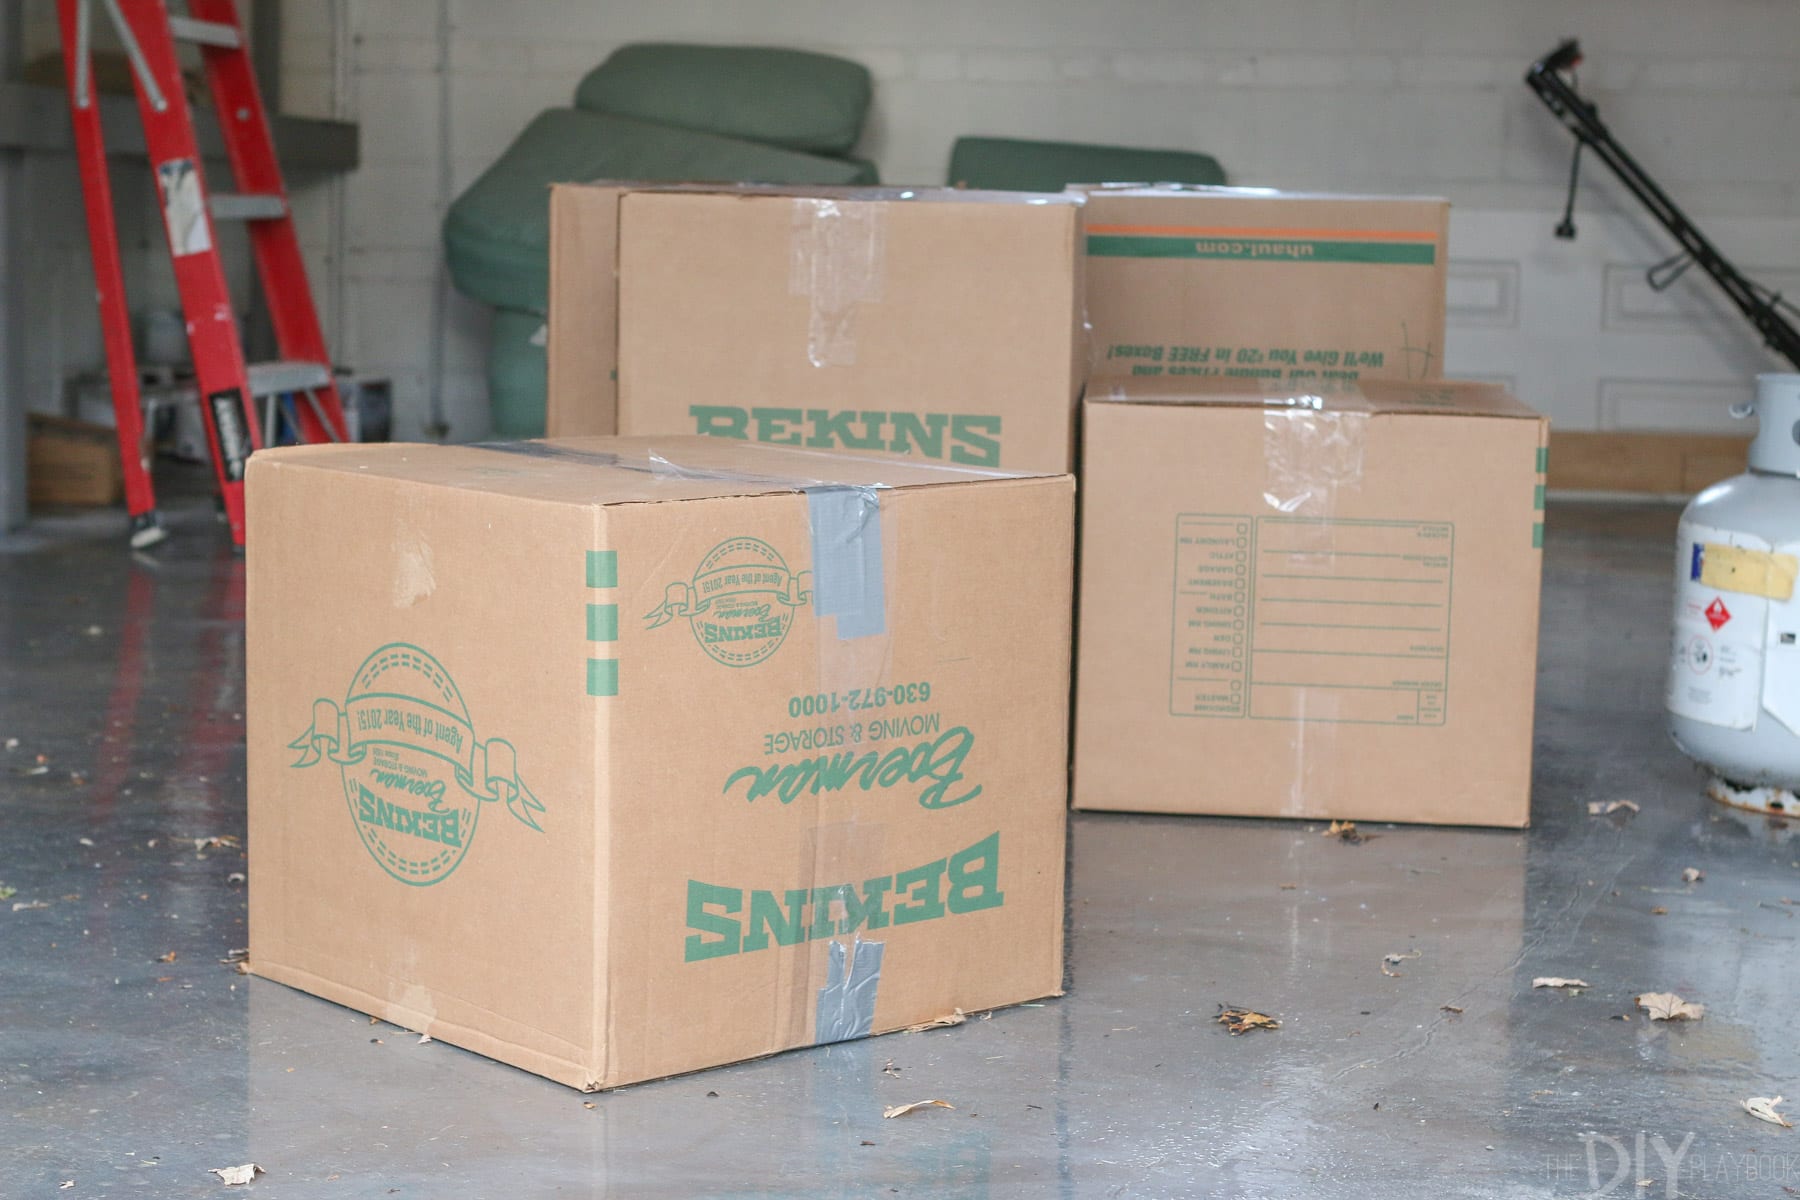 Moving boxes in the garage